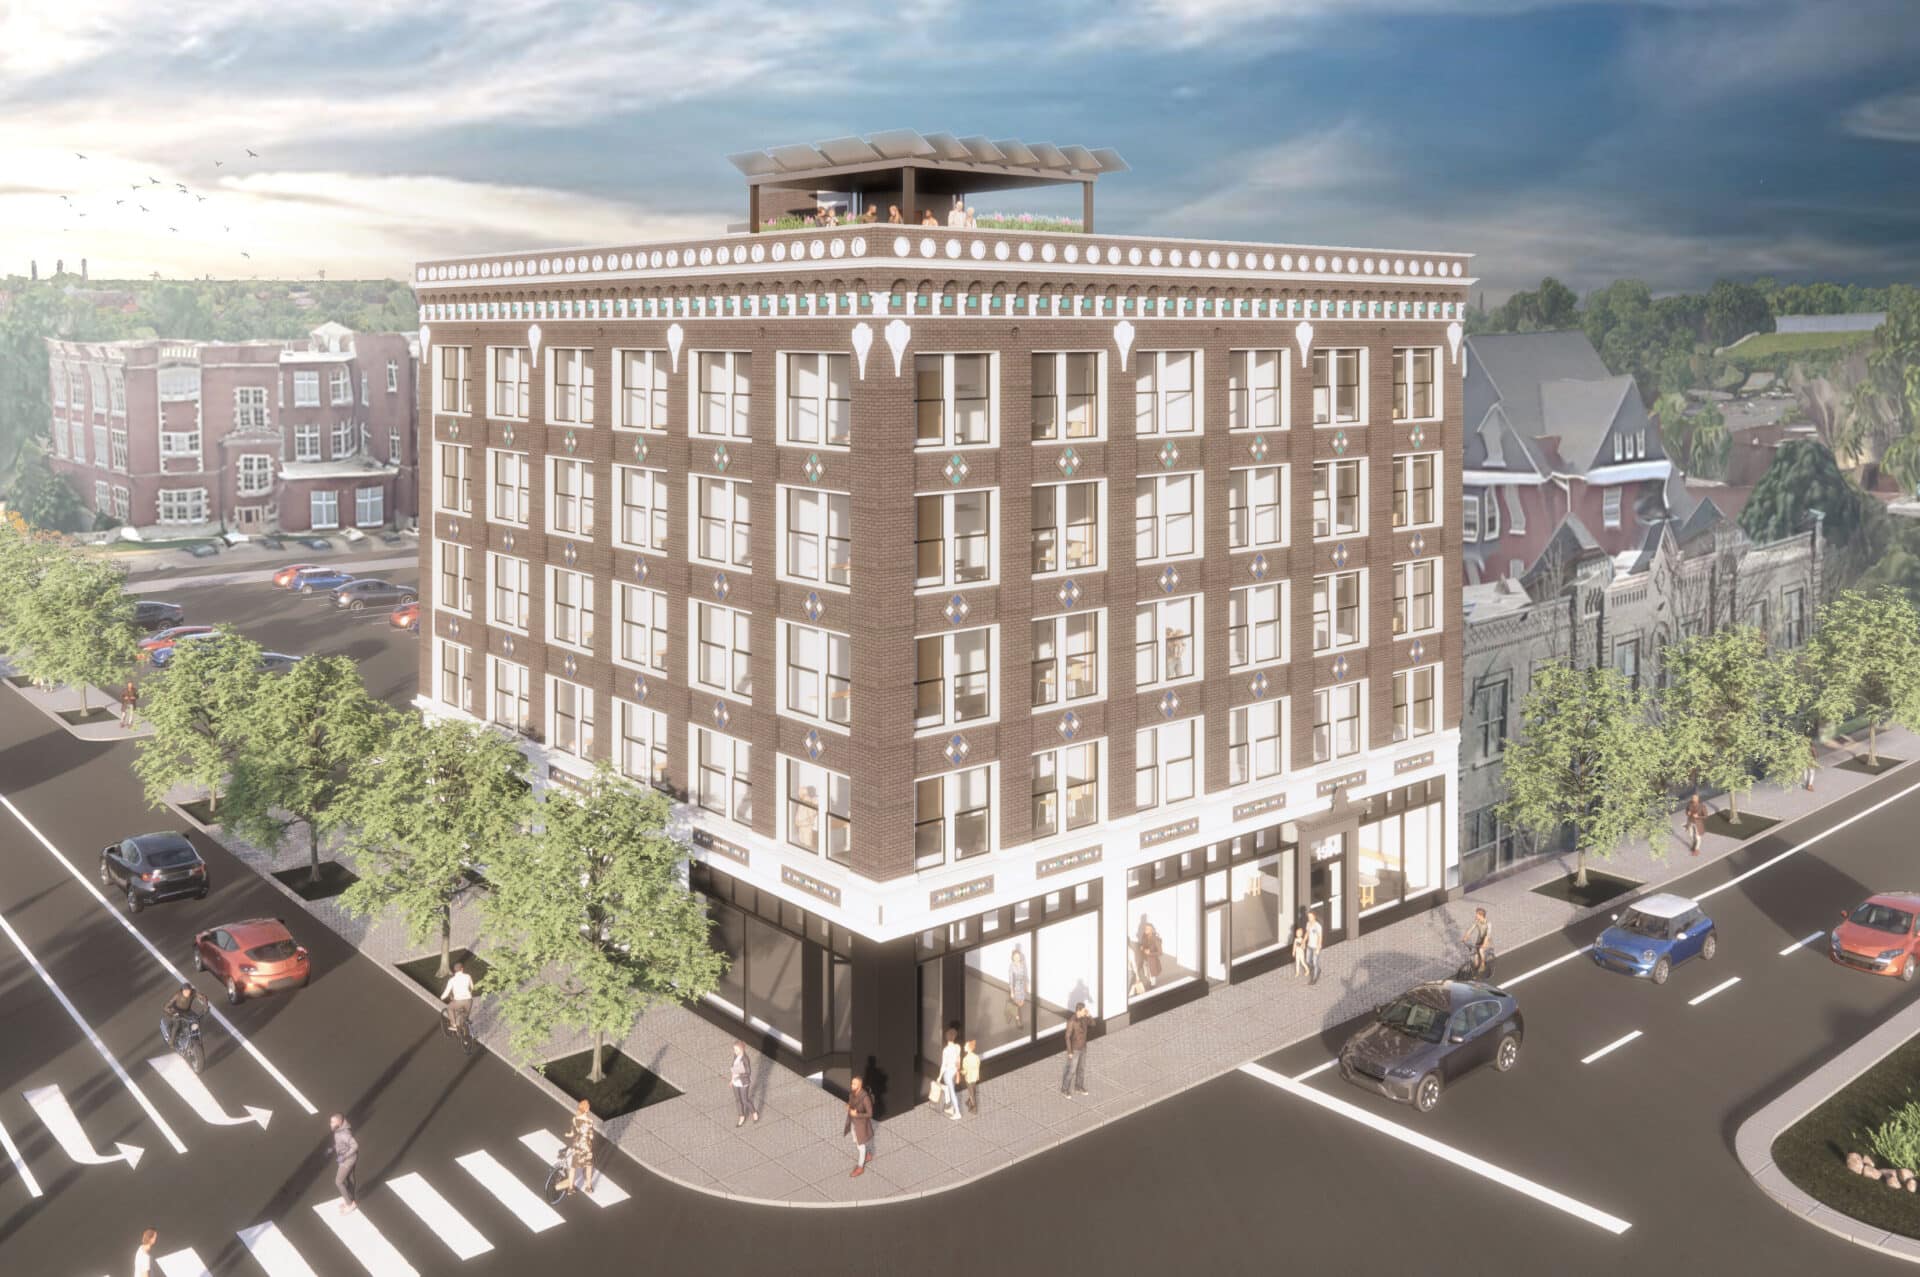 Rendering of 1500 South Grand Exterior Building By Trivers Architects